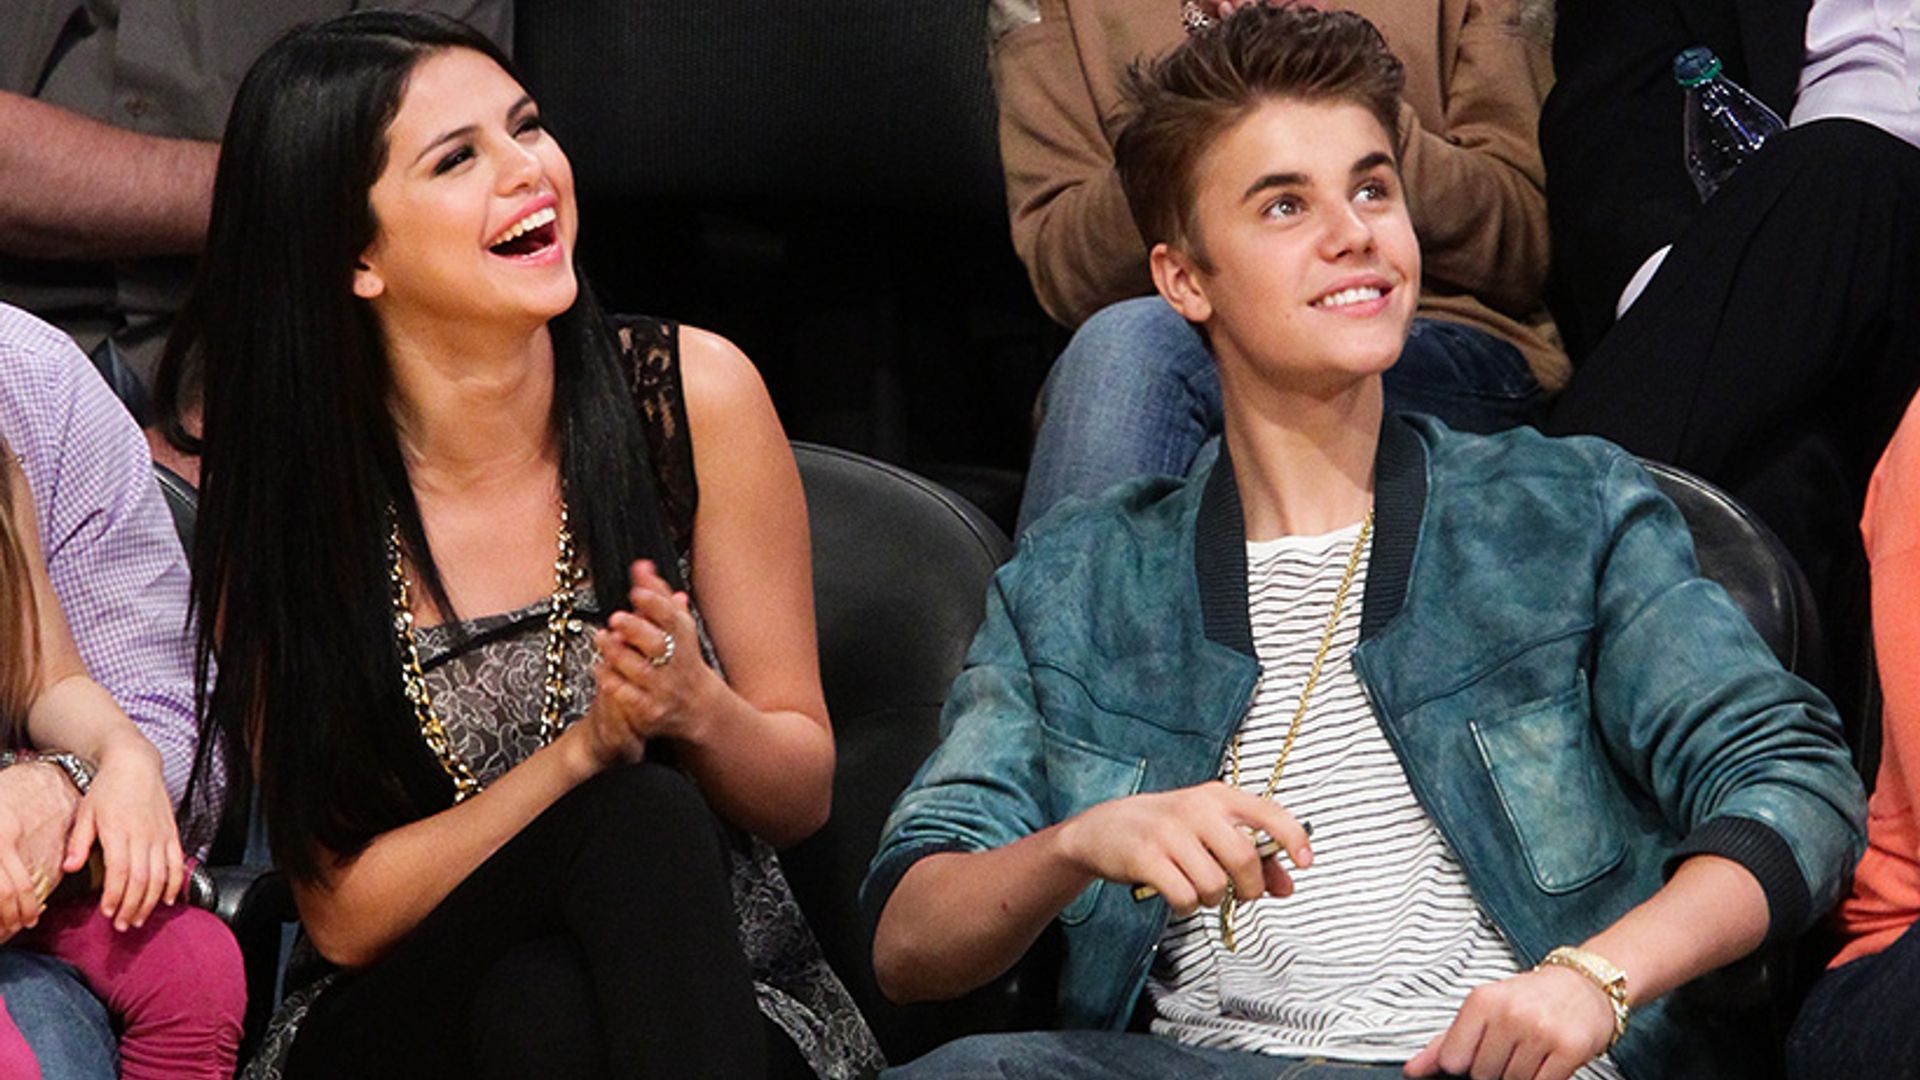 Are justin bieber and selena gomez dating